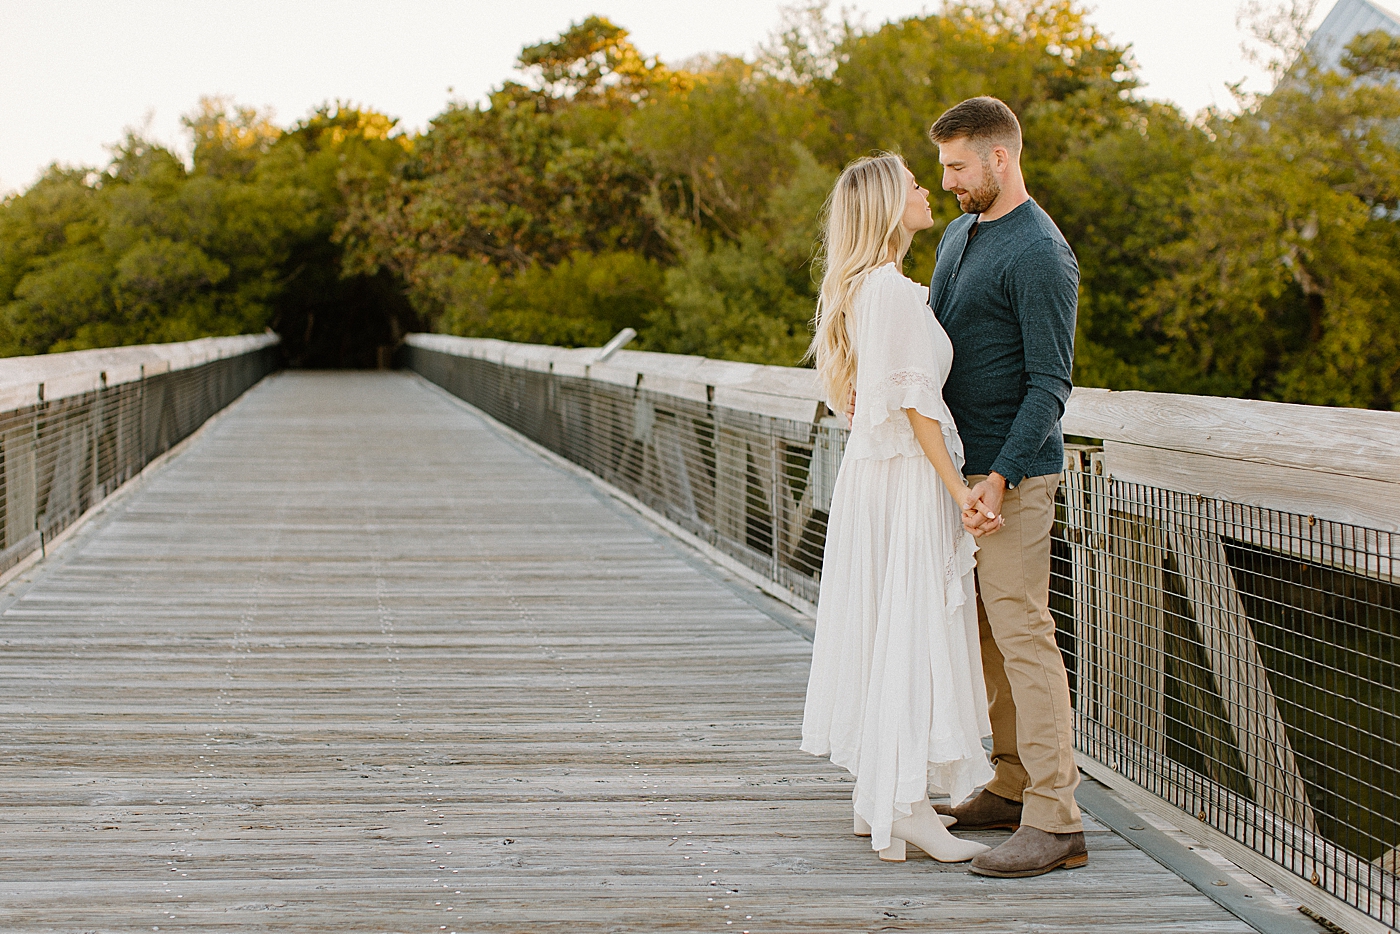 Couple hold hands and look into each others eyes on wooden bridge Jupiter Engagement Photography captured by South Florida Engagement Photographer Erika Tuesta Photography